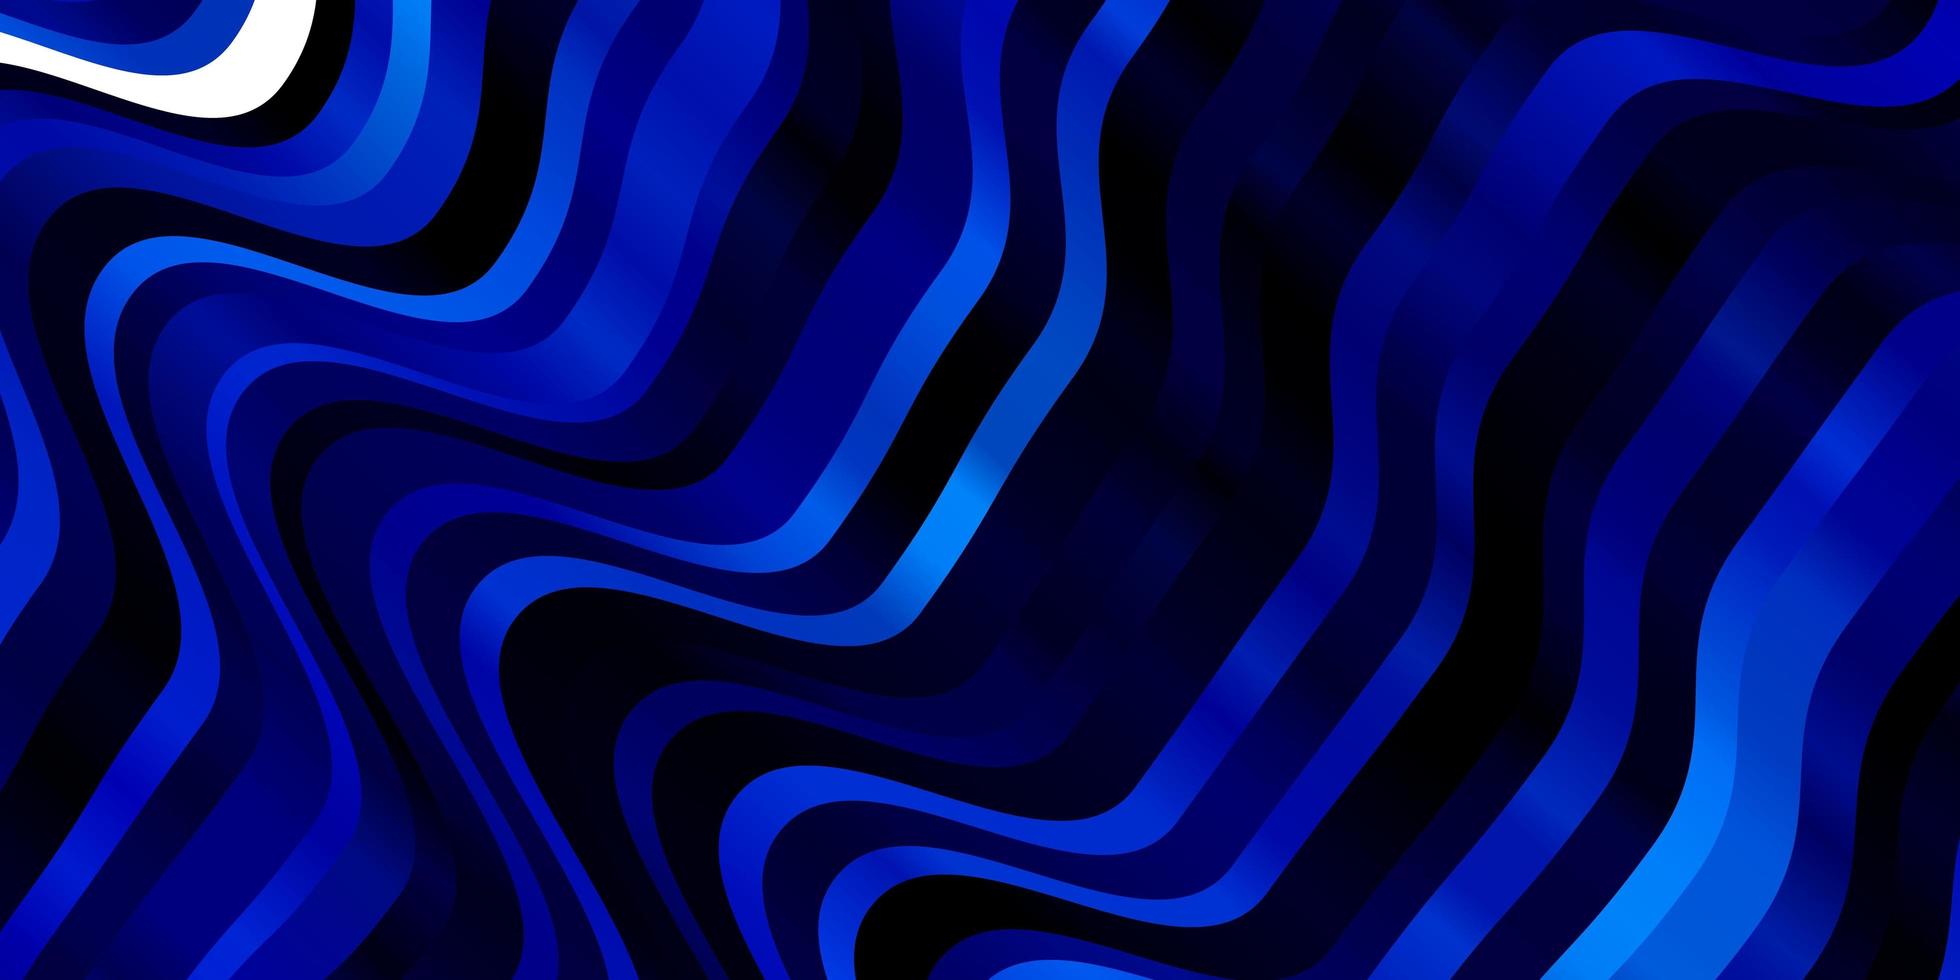 Dark BLUE vector template with curved lines.